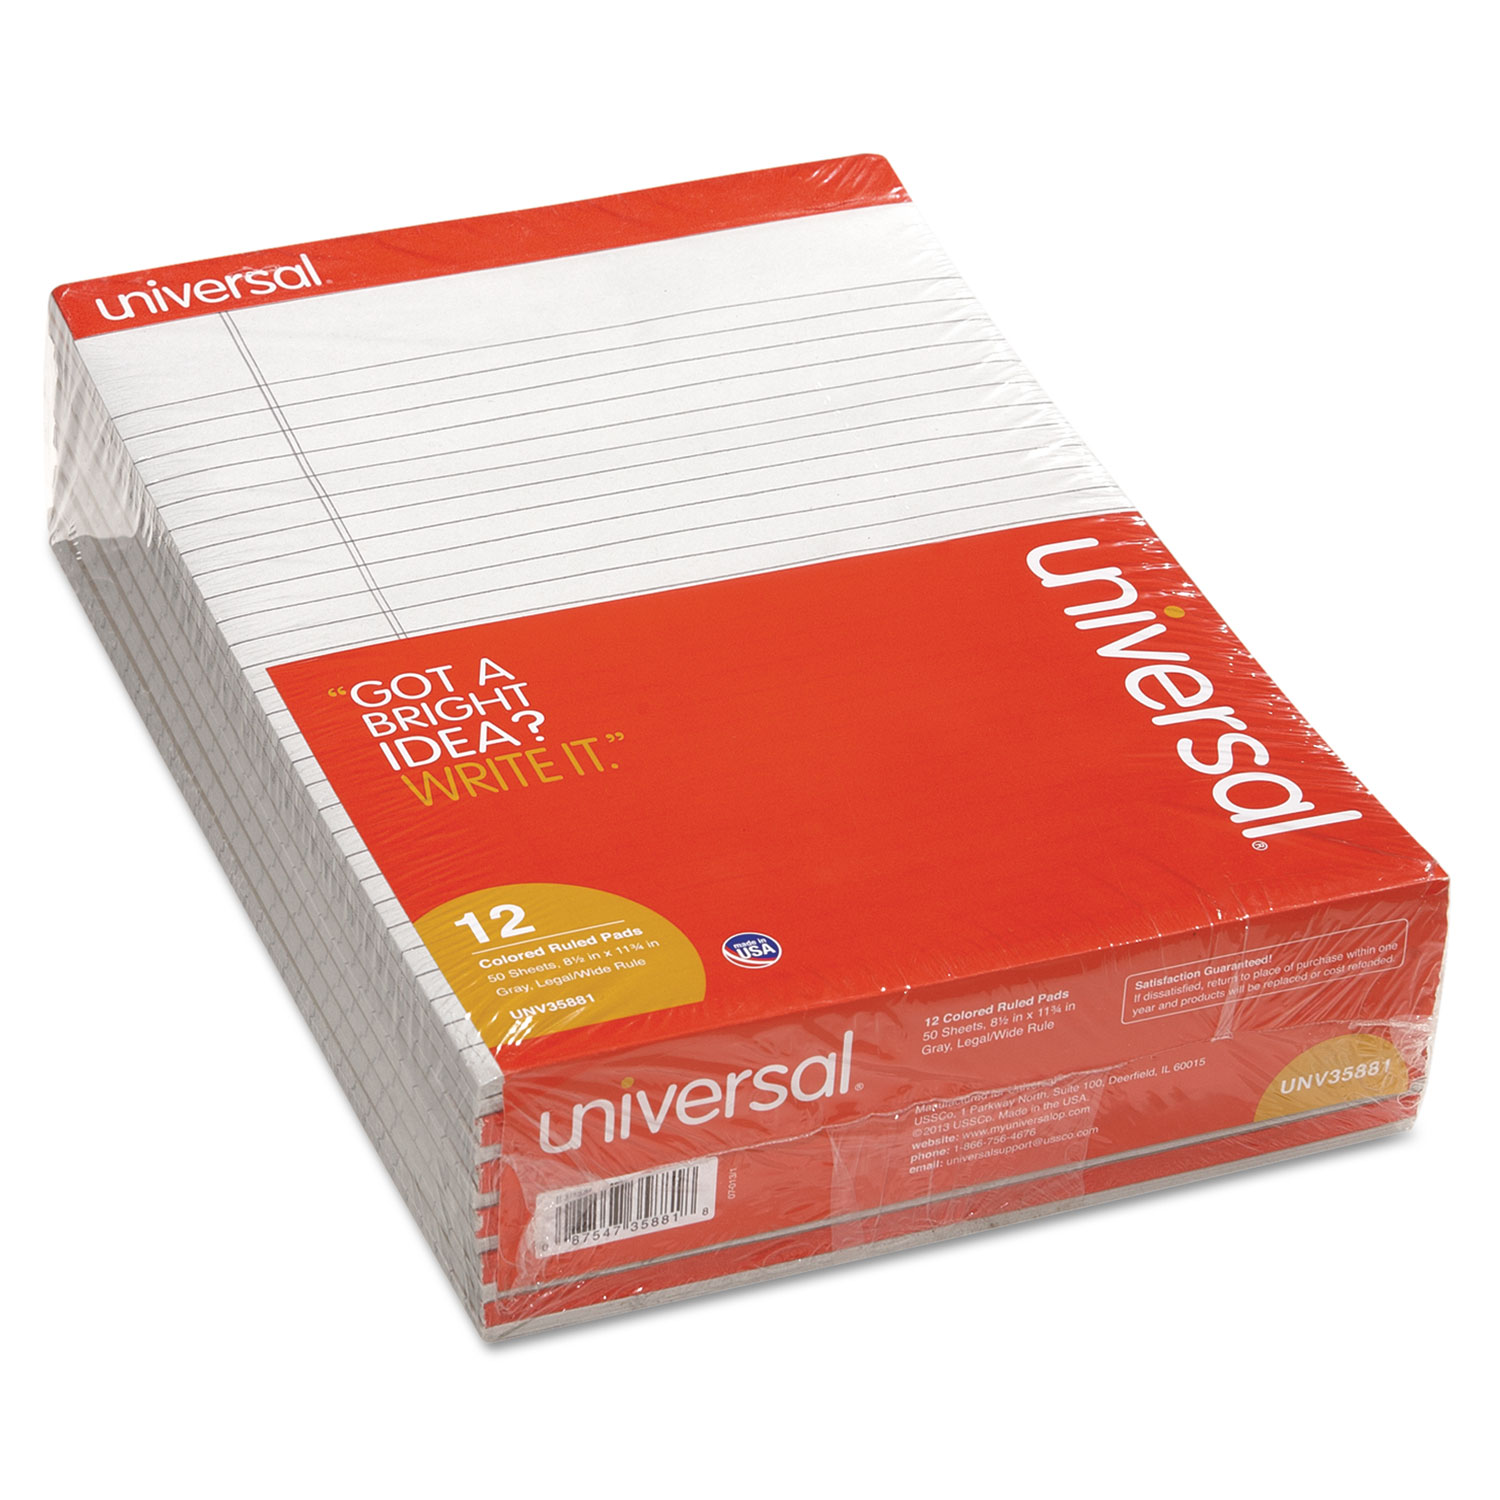  Universal UNV35881 Colored Perforated Writing Pads, Wide/Legal Rule, 8.5 x 11, Gray, 50 Sheets, Dozen (UNV35881) 